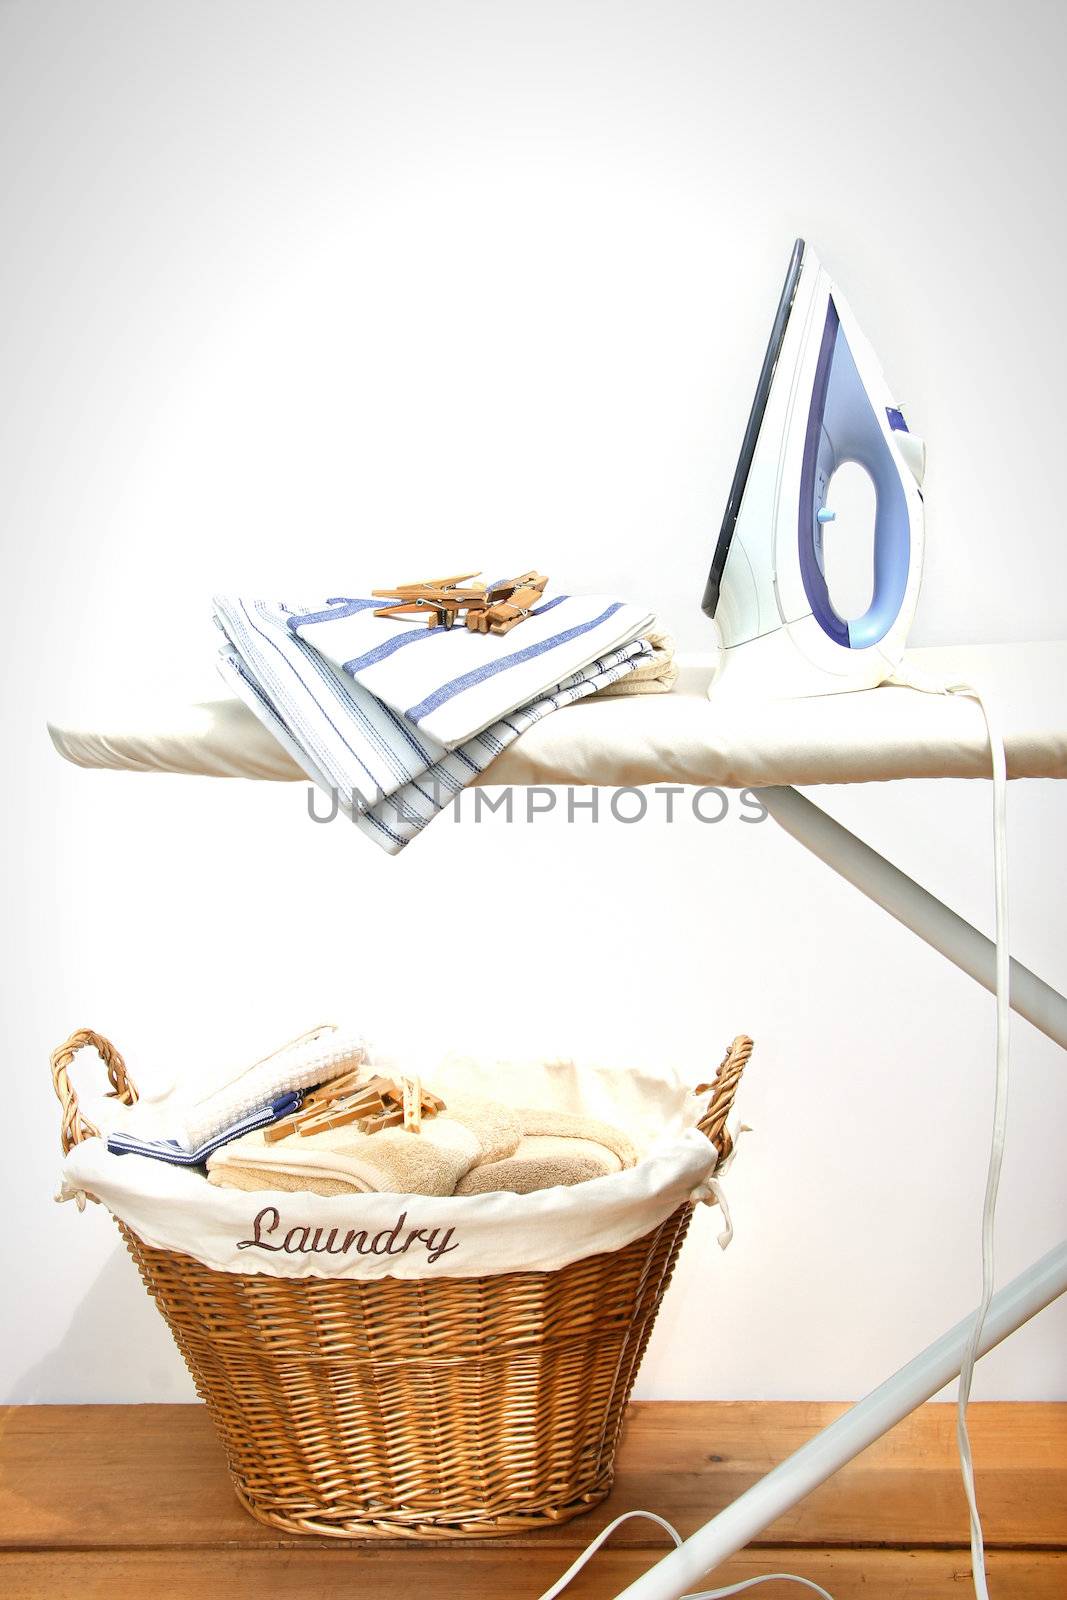 Ironing board with laundry  by Sandralise